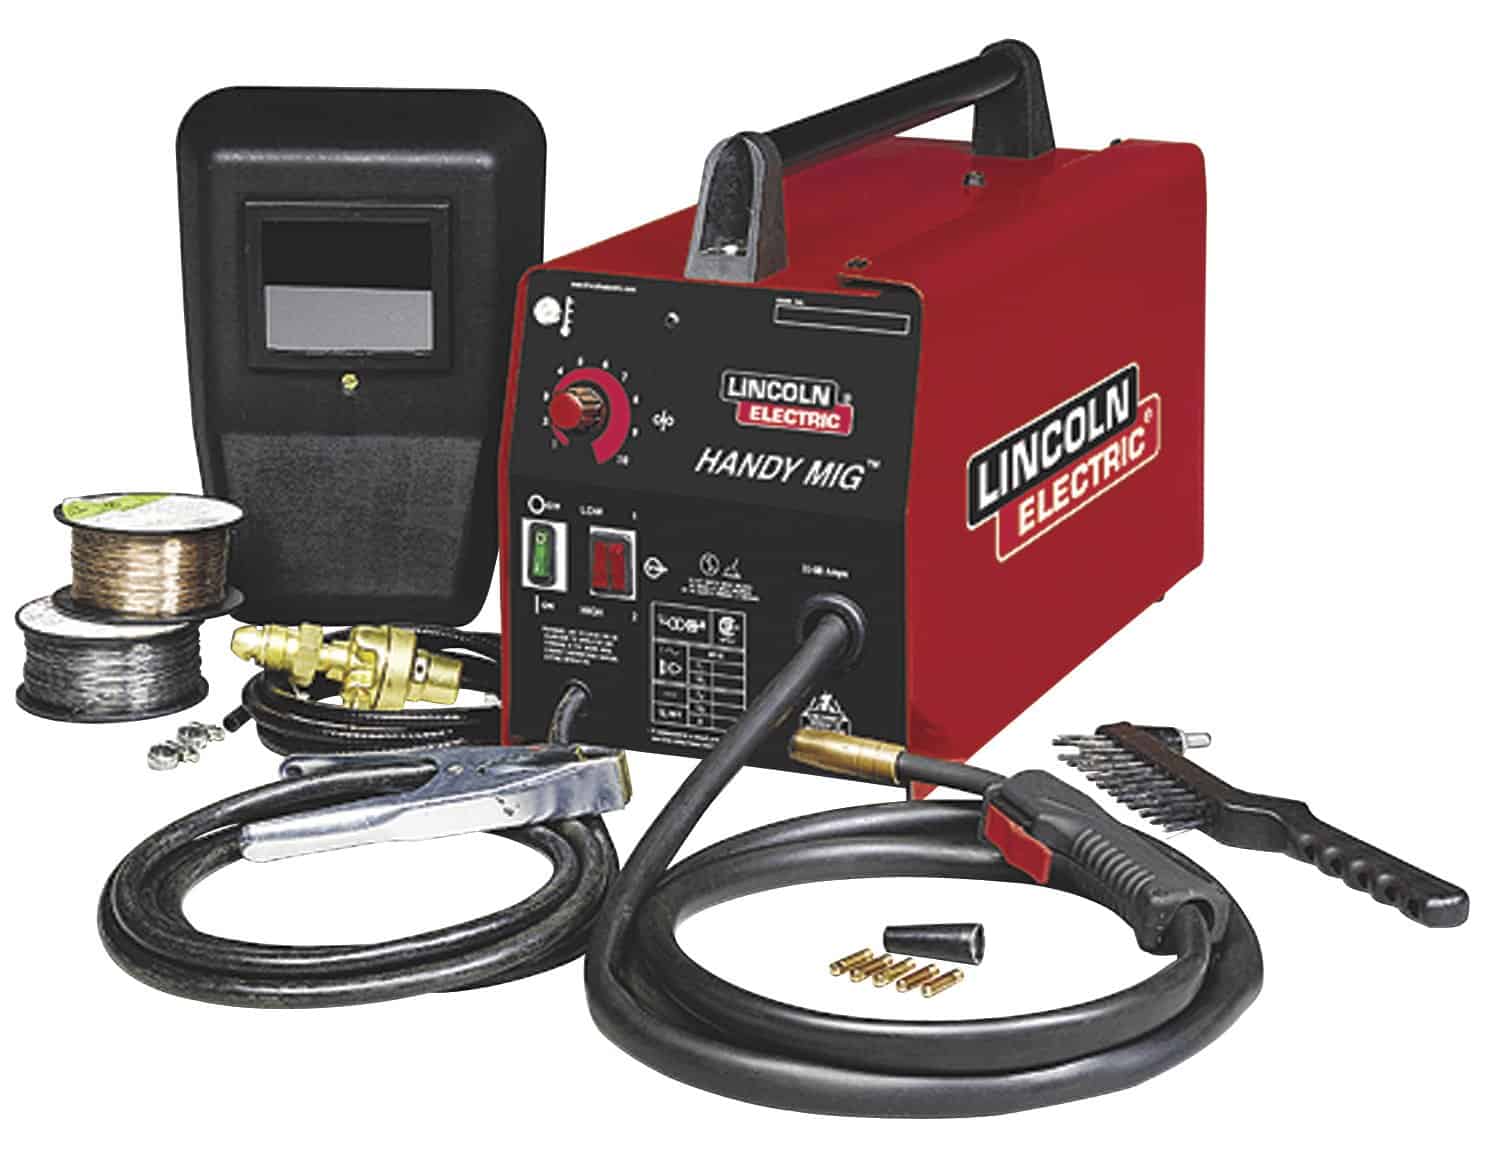 image of a lincoln electric handy mig welder